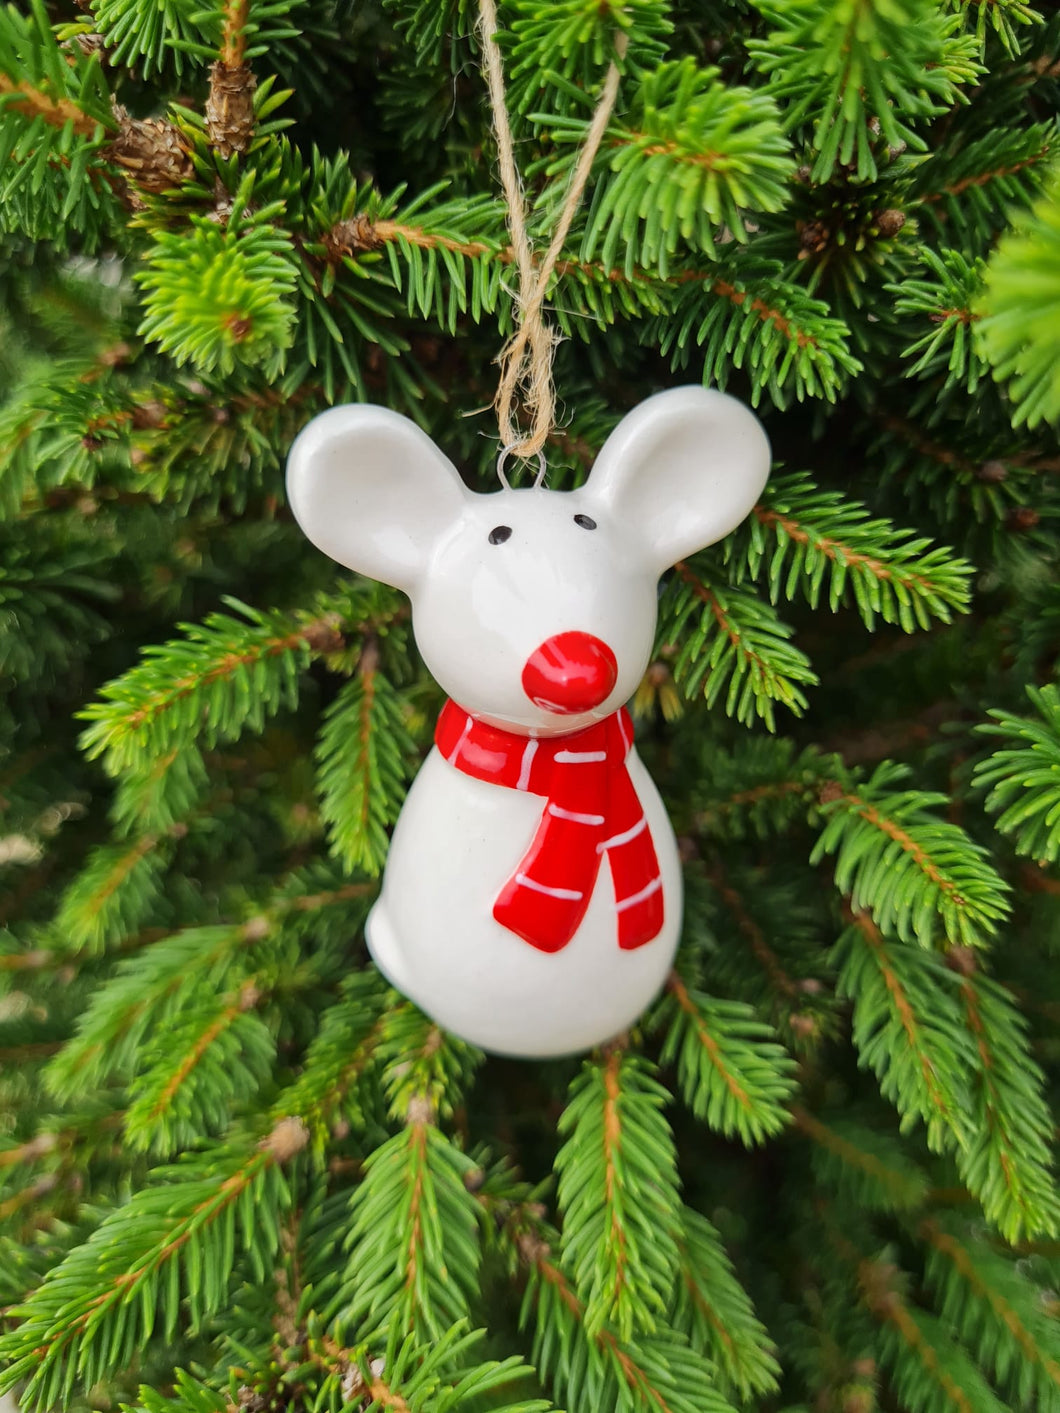 Ceramic white mouse with red scarf - hanging Christmas tree decoration